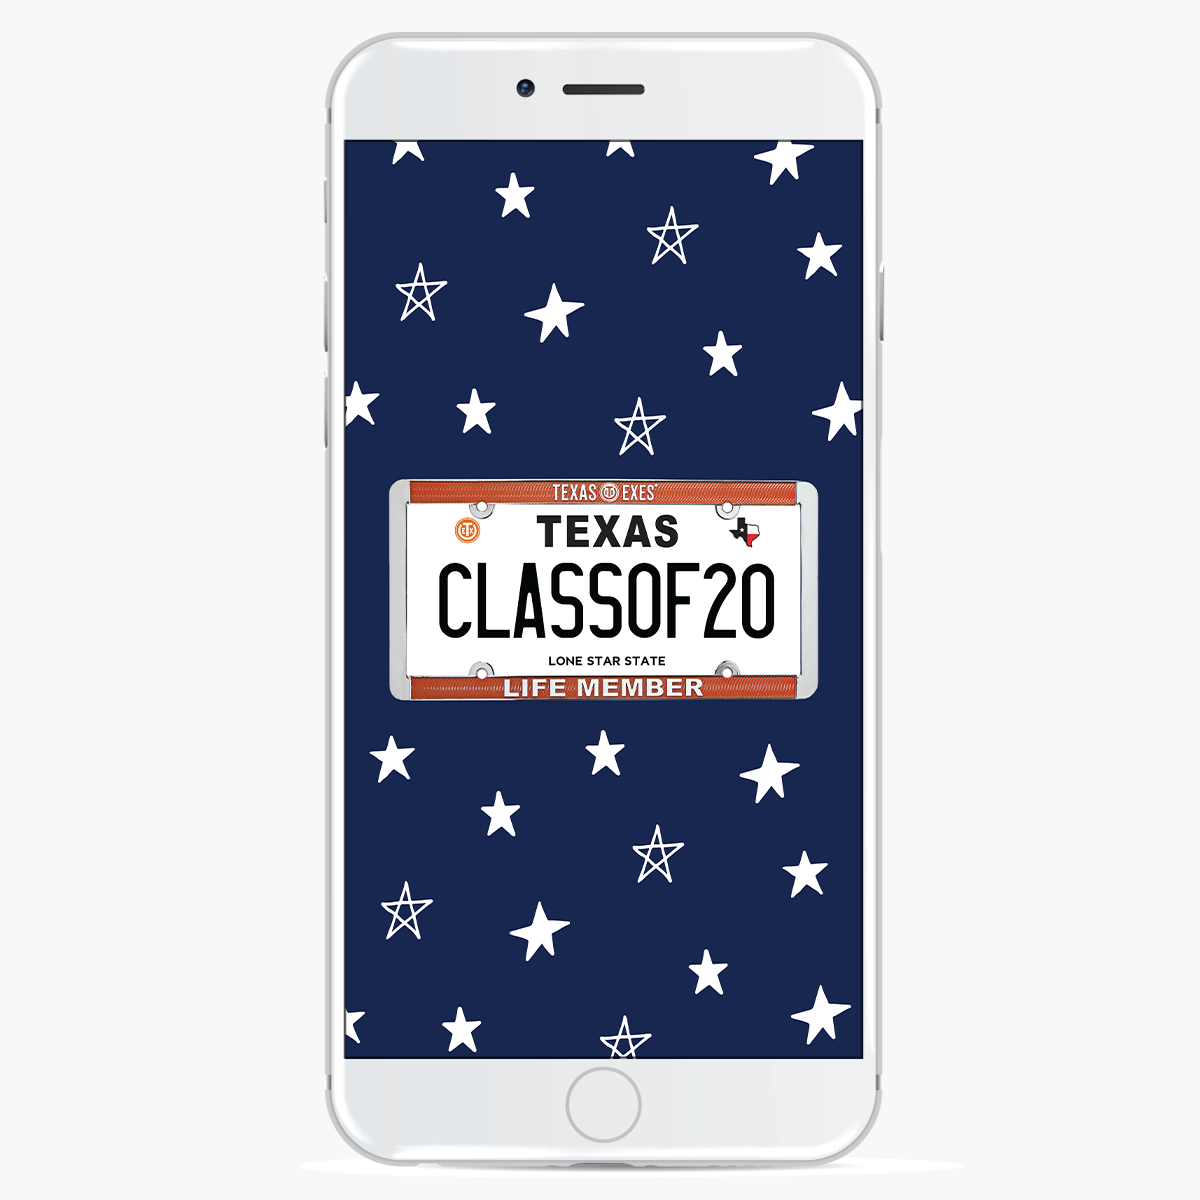 Class of 2020 License Plate